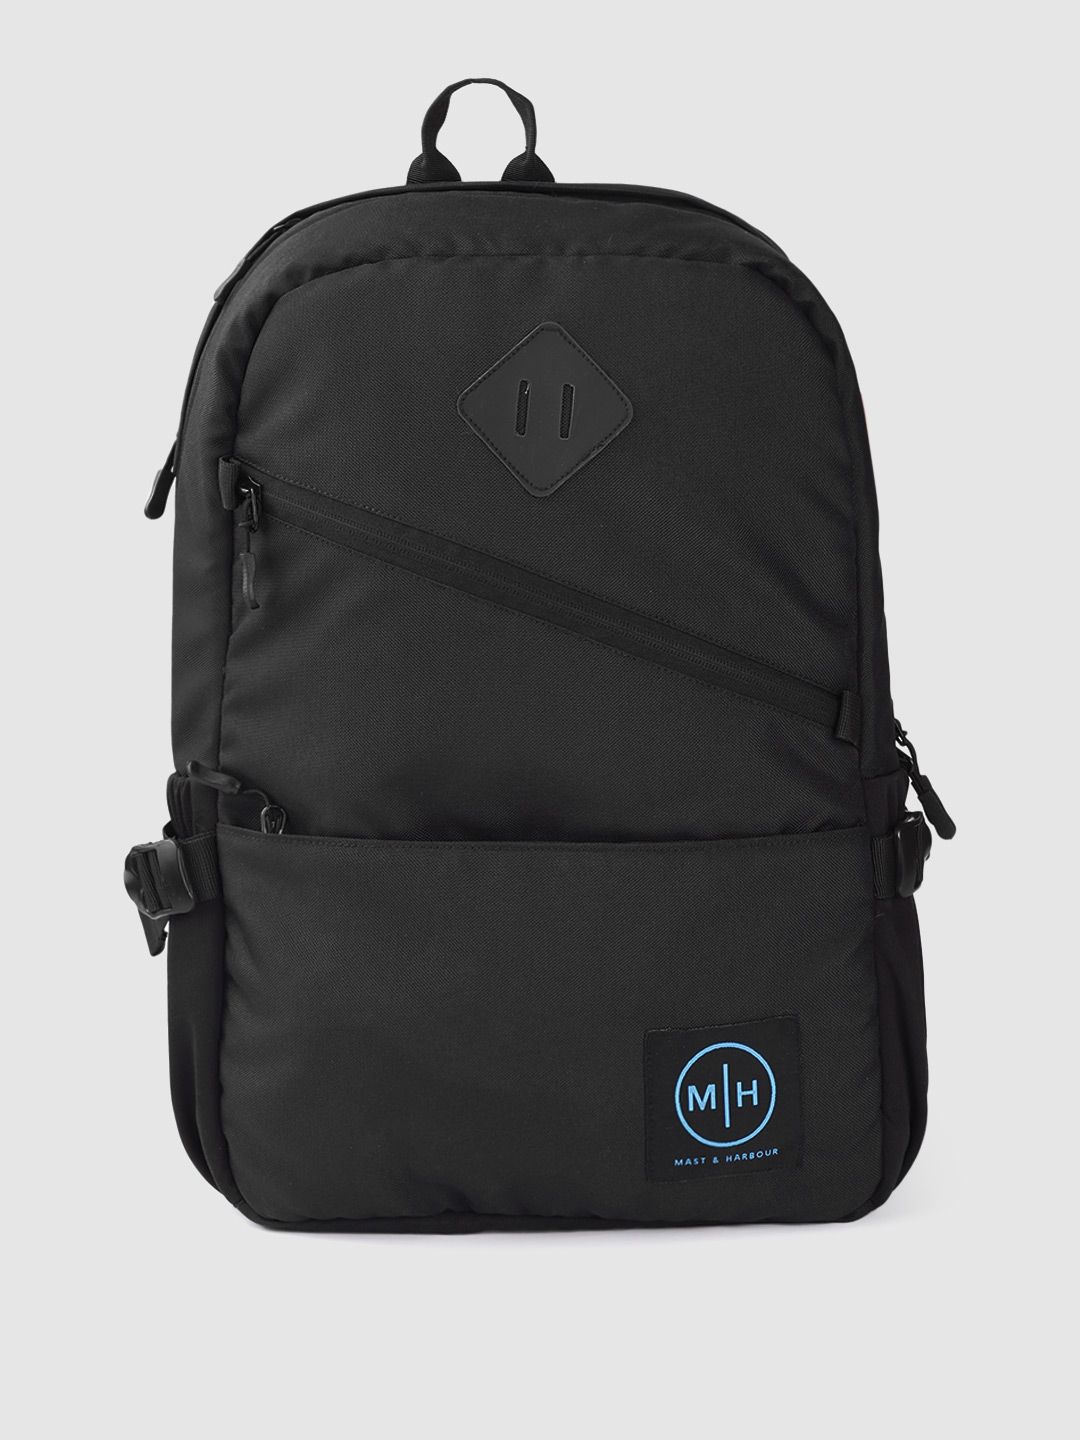 Mast & Harbour Unisex Black Solid Backpack 16.2 L Price in India